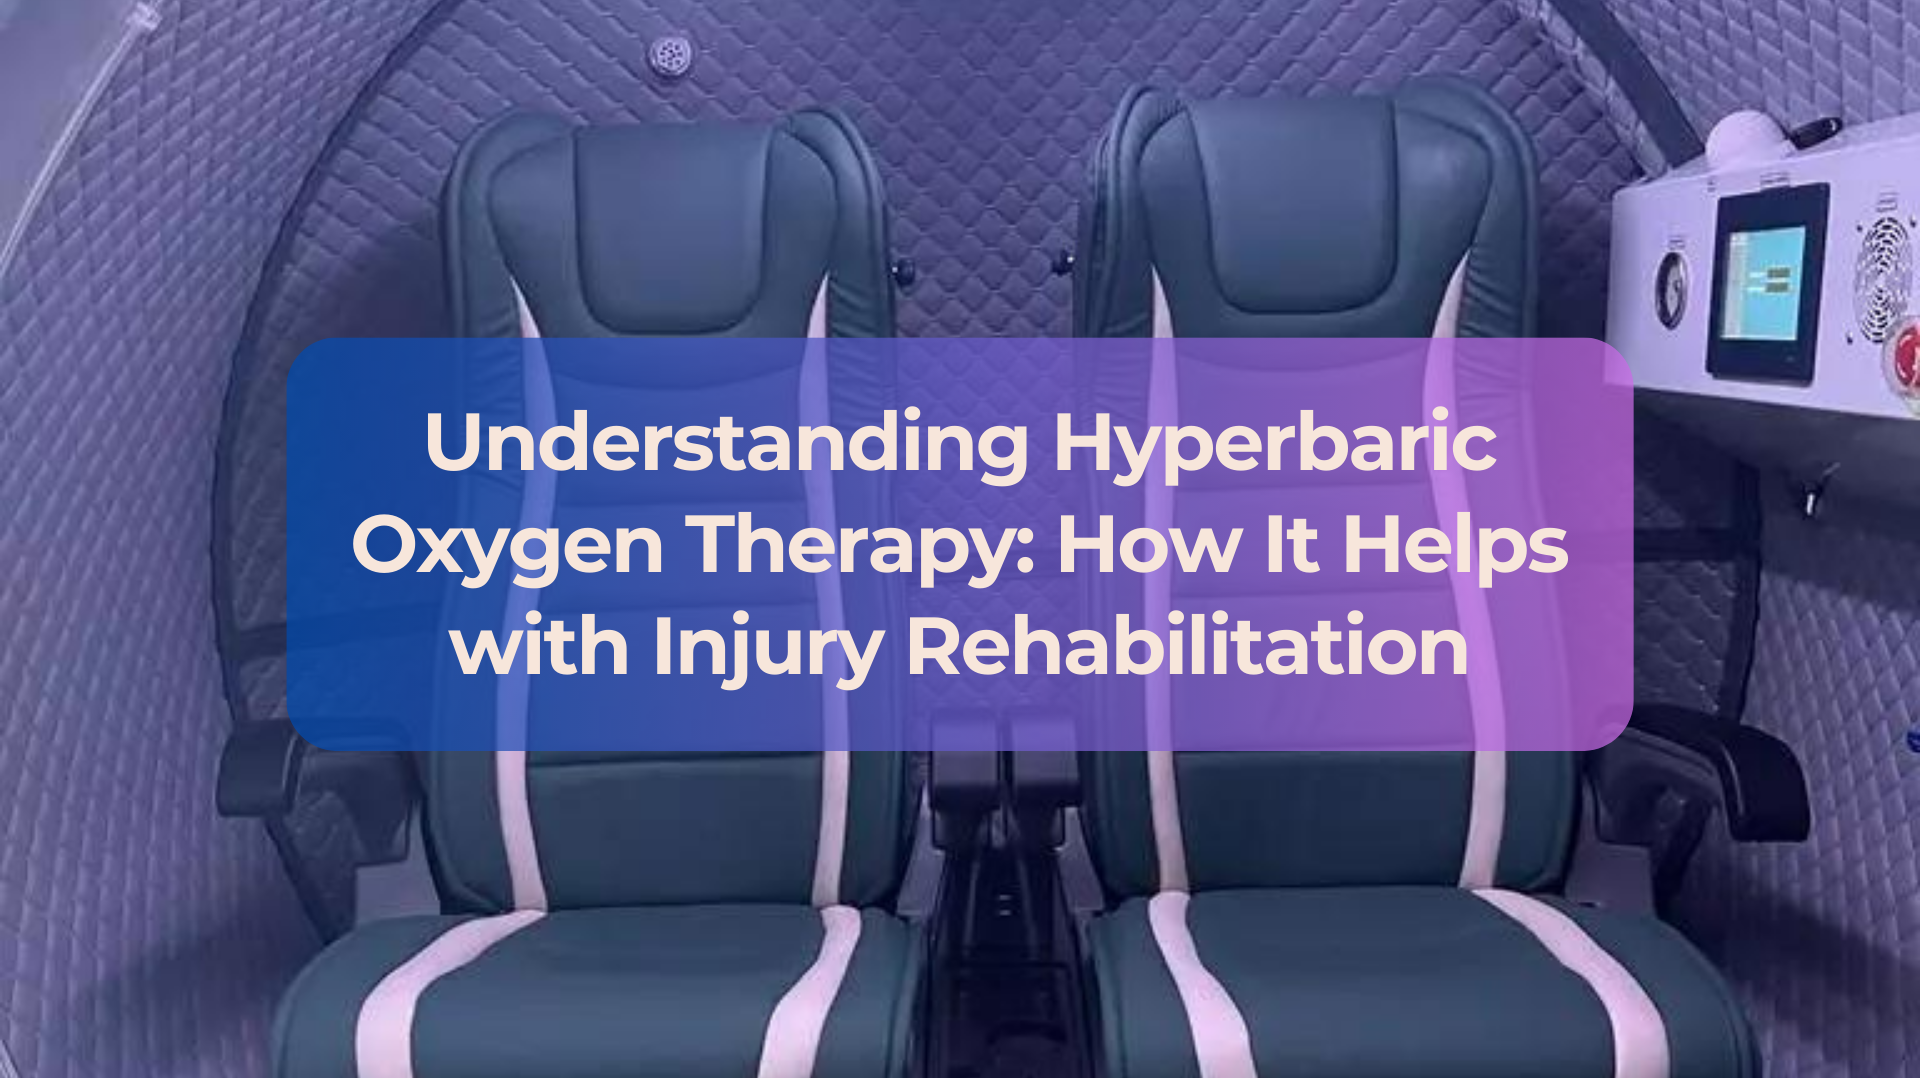 How Hyperbaric Oxygen Therapy Helps with Injury Rehabilitation